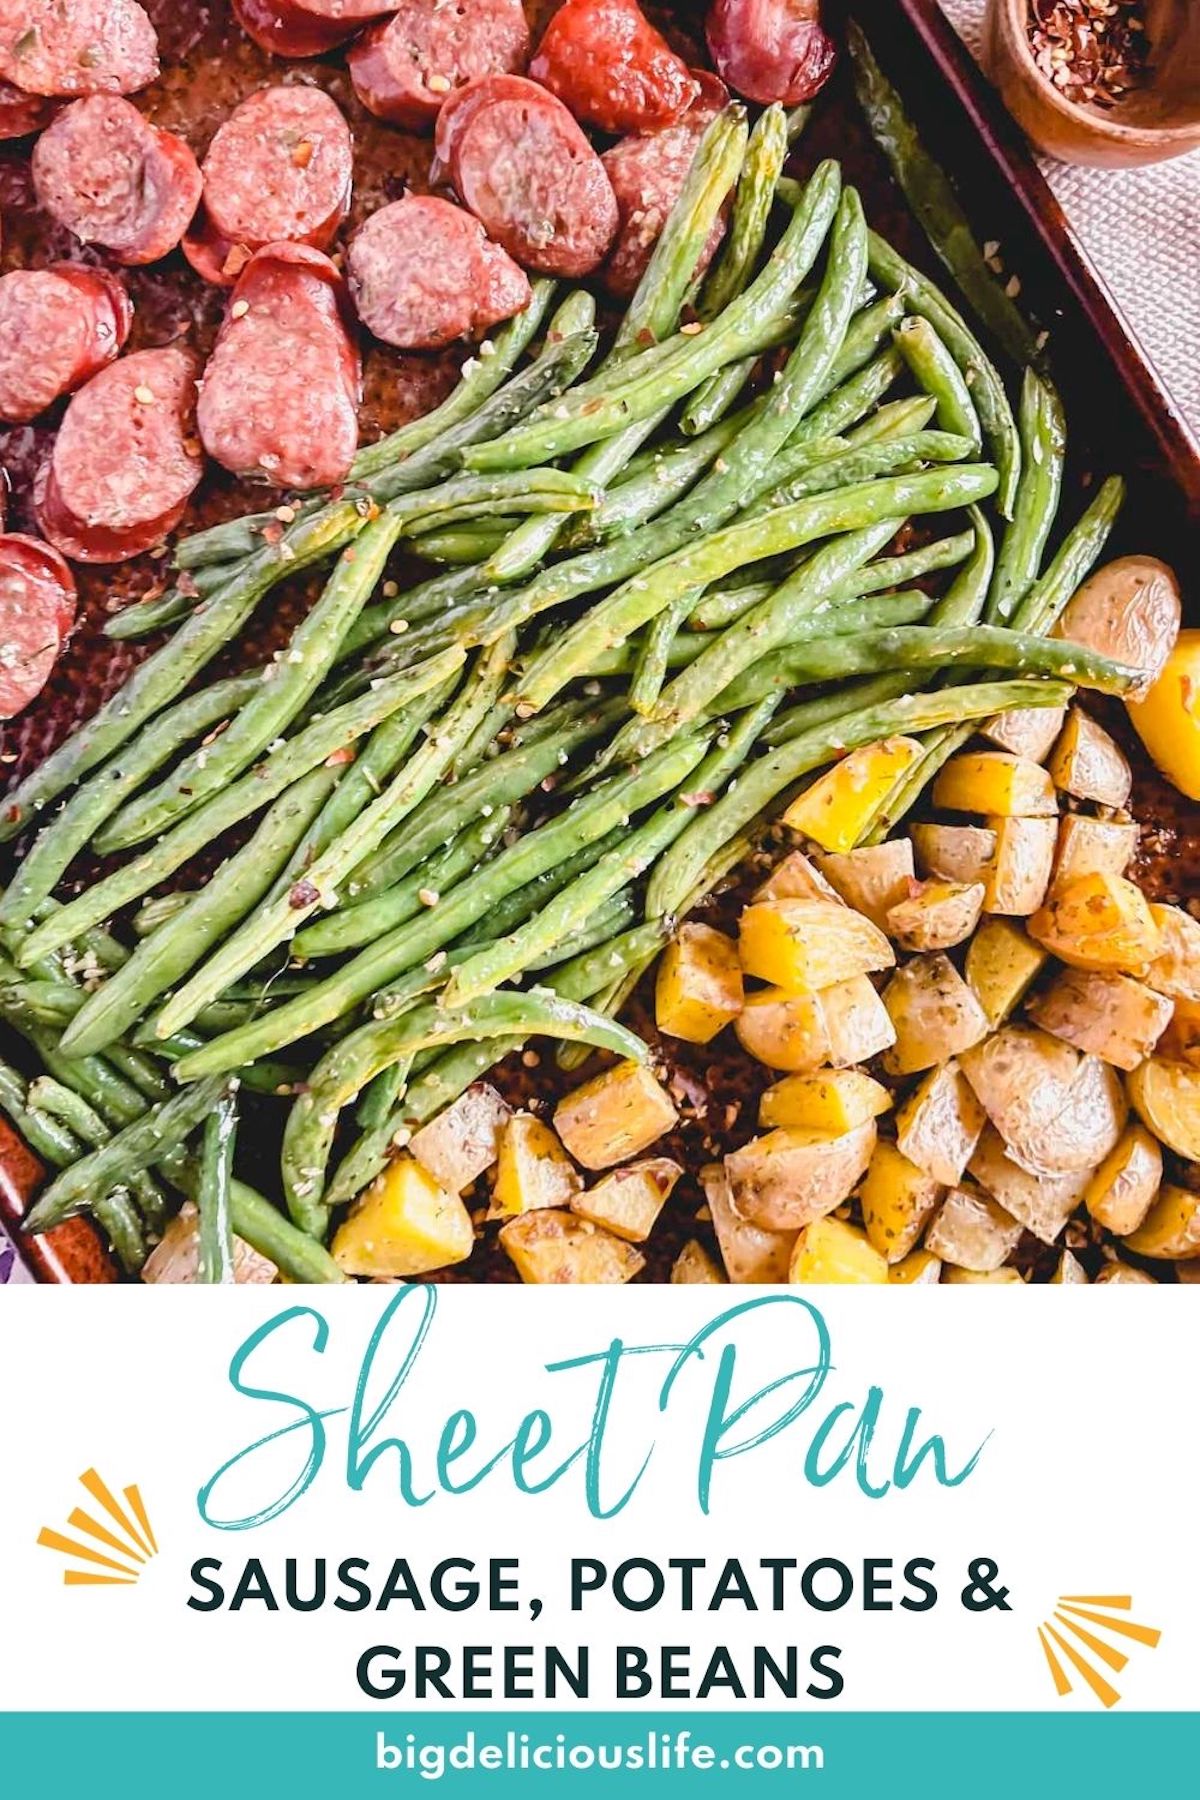 Branded Pinterest pin with photo of sheet pan sausage, potatoes and green beans.